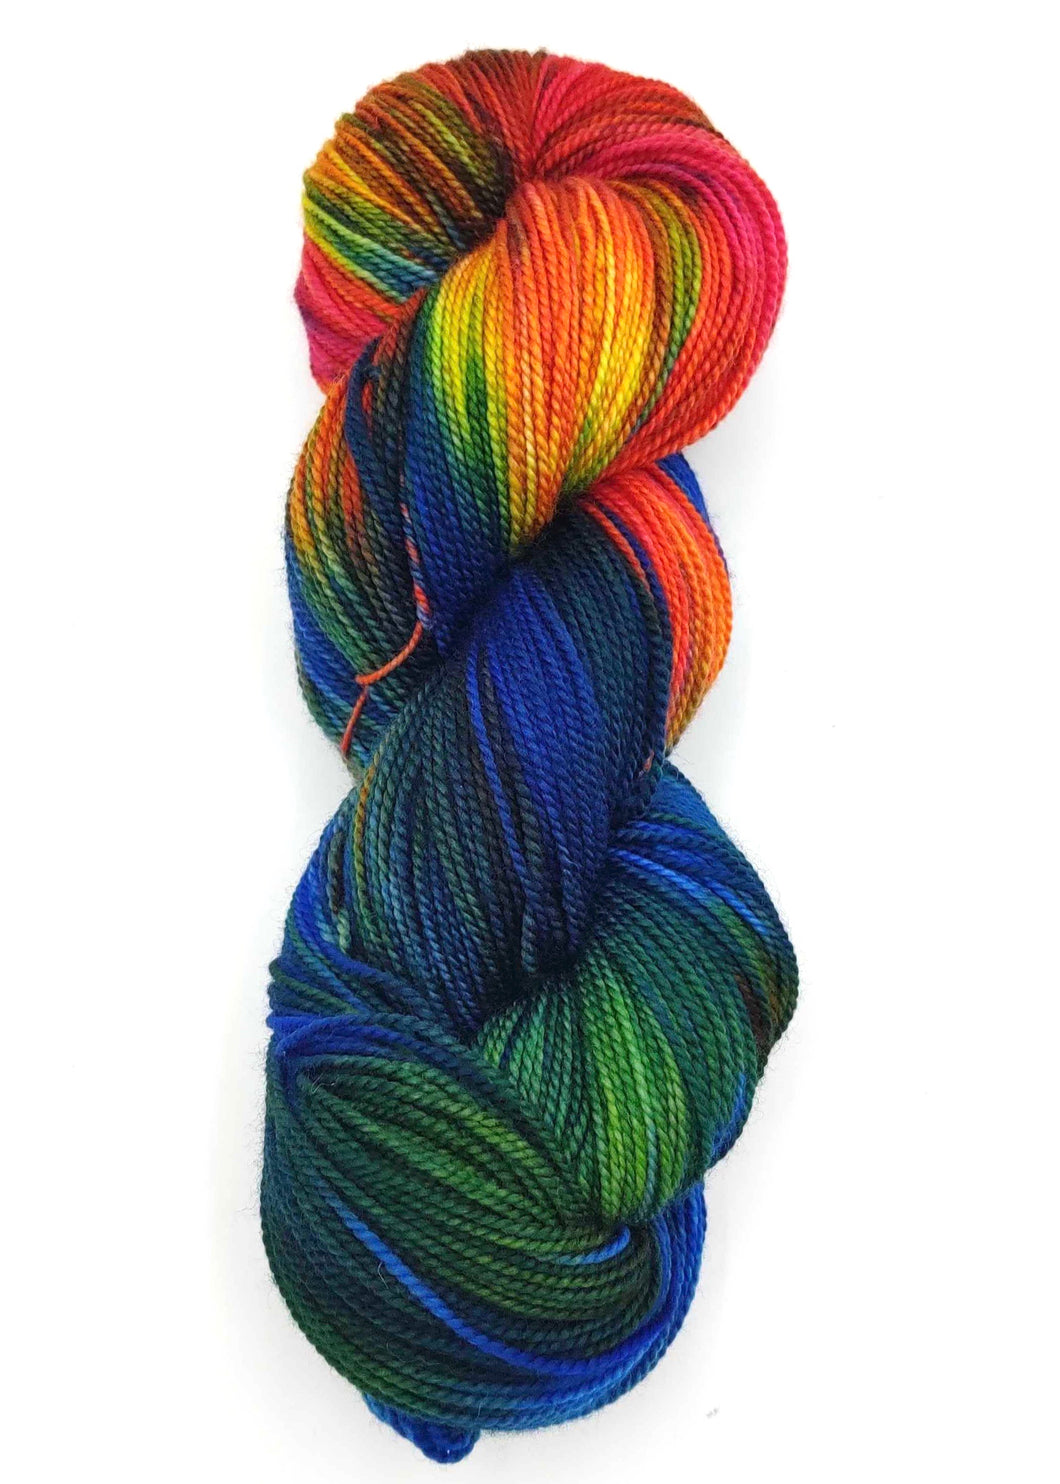 Baah Yarn - Exclusive Monthly Yarn Color - March '20